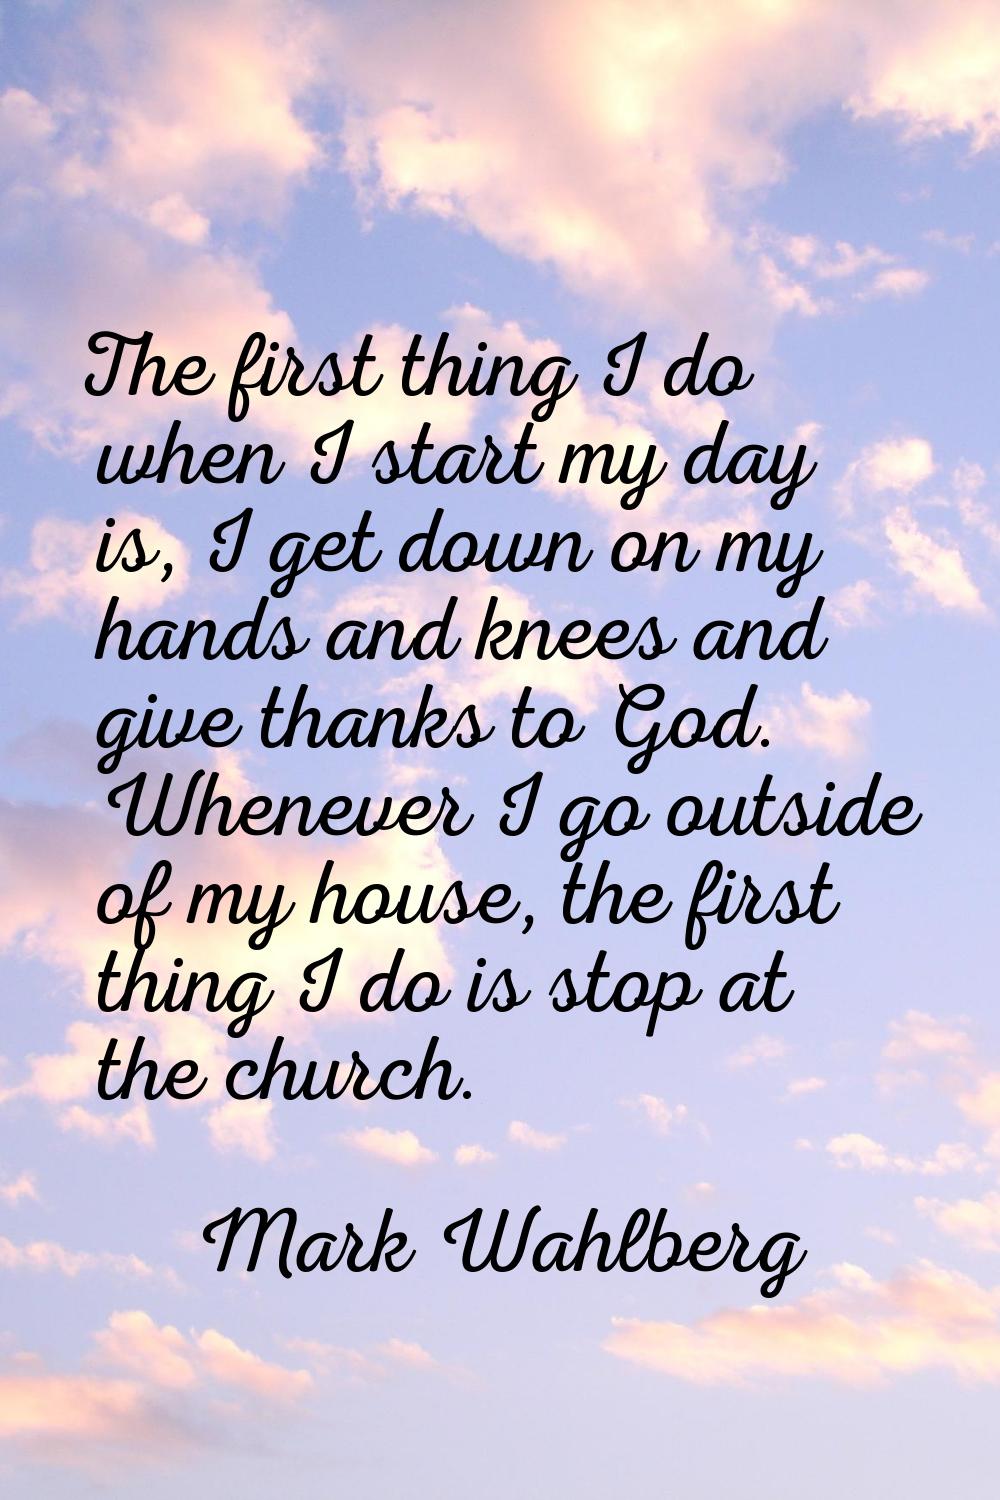 The first thing I do when I start my day is, I get down on my hands and knees and give thanks to Go